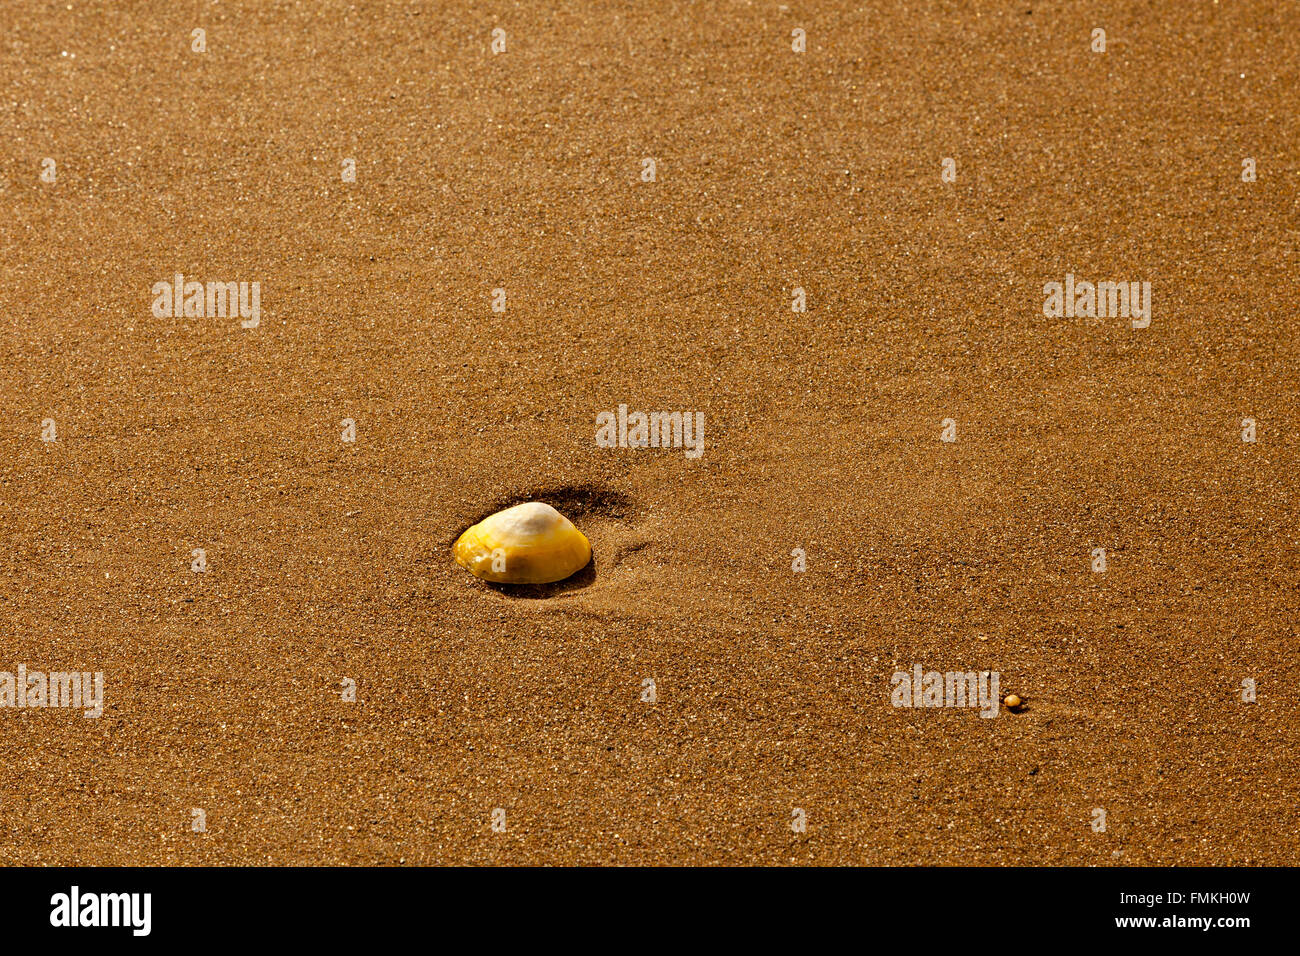 A solitary common limpet (Patella vulgata) in the sand at Lee Bay, North Devon, England, UK Stock Photo